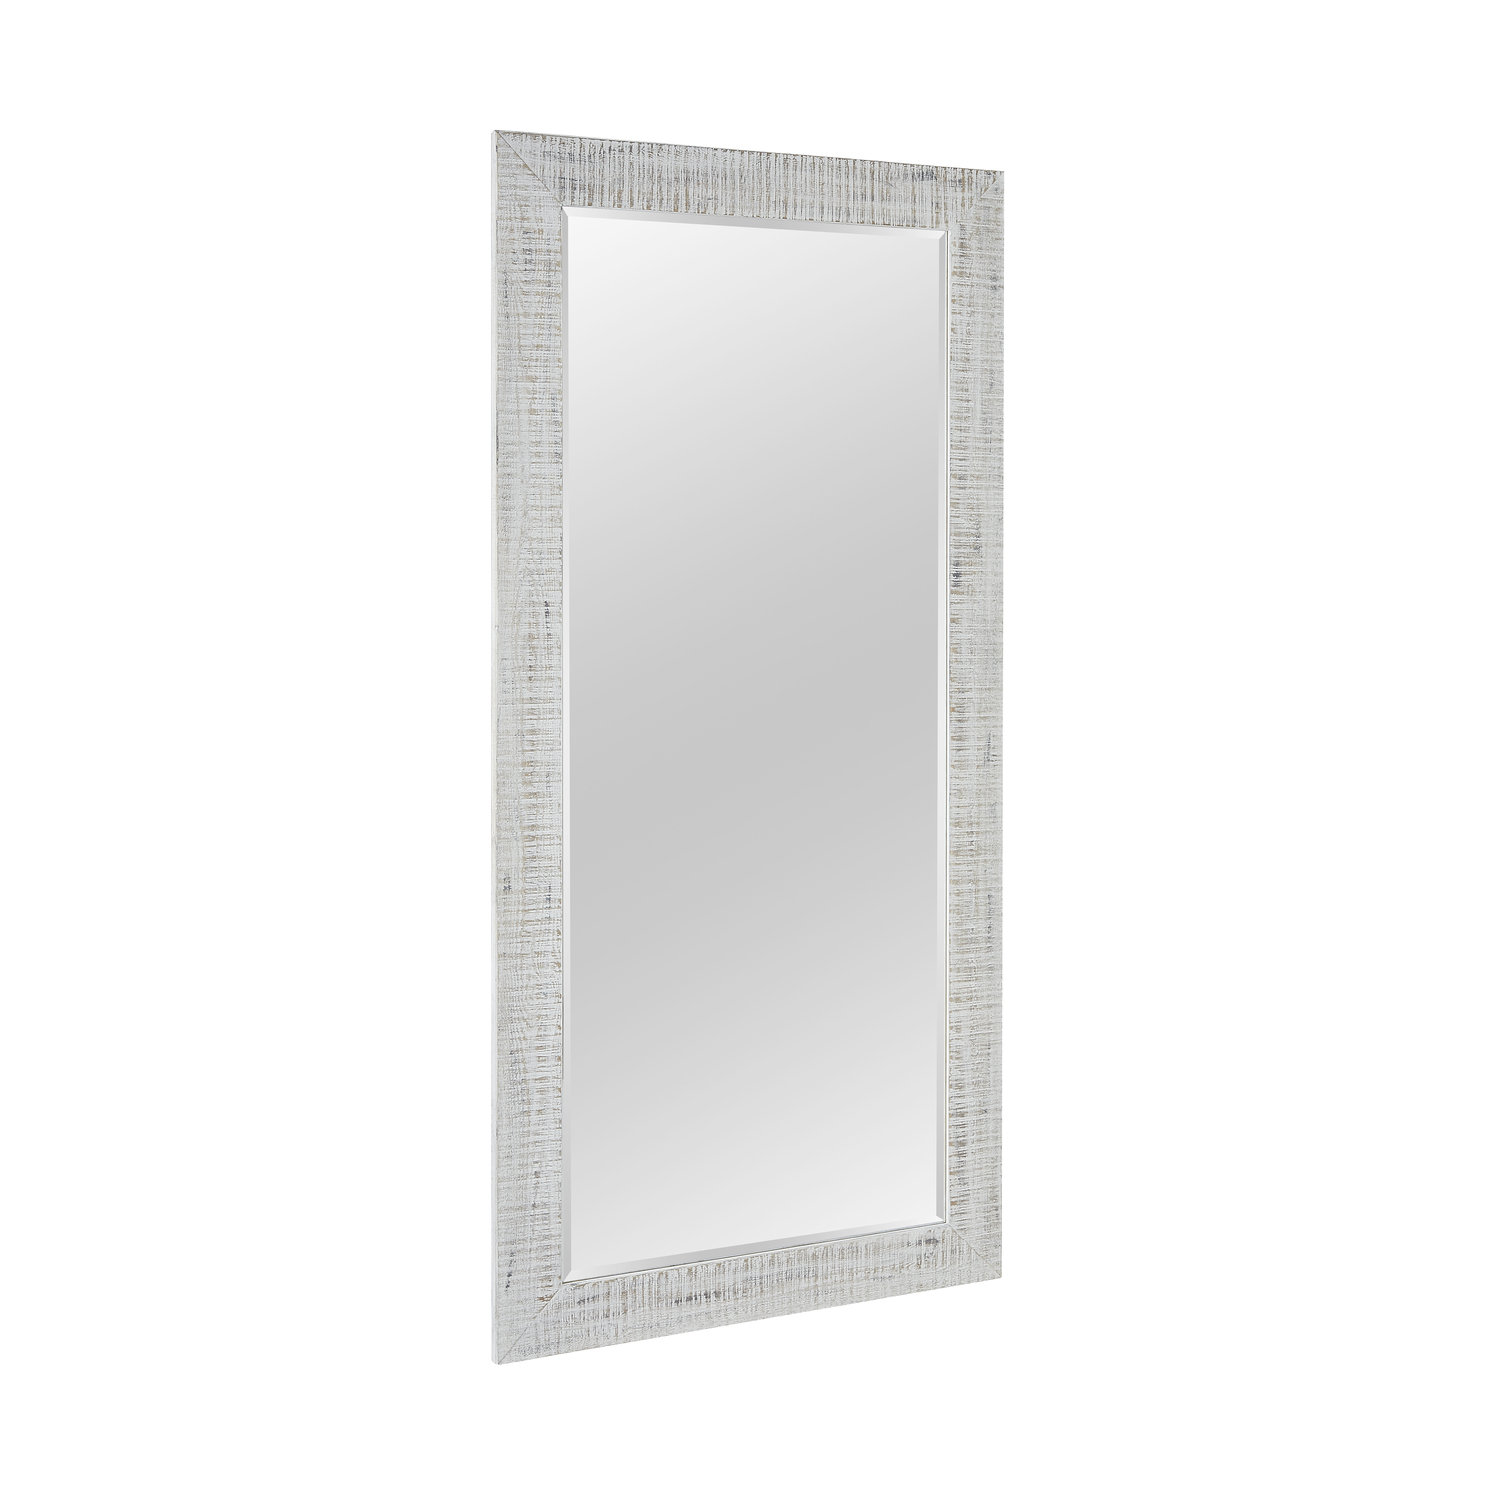 Wall Mirror, Full length Mirror, Framed Bevel Leaner Mirror, Full Body  Mirror for Home, Floor Mirror with Faux Wood Frame, 66LX32W Large Mirror  for